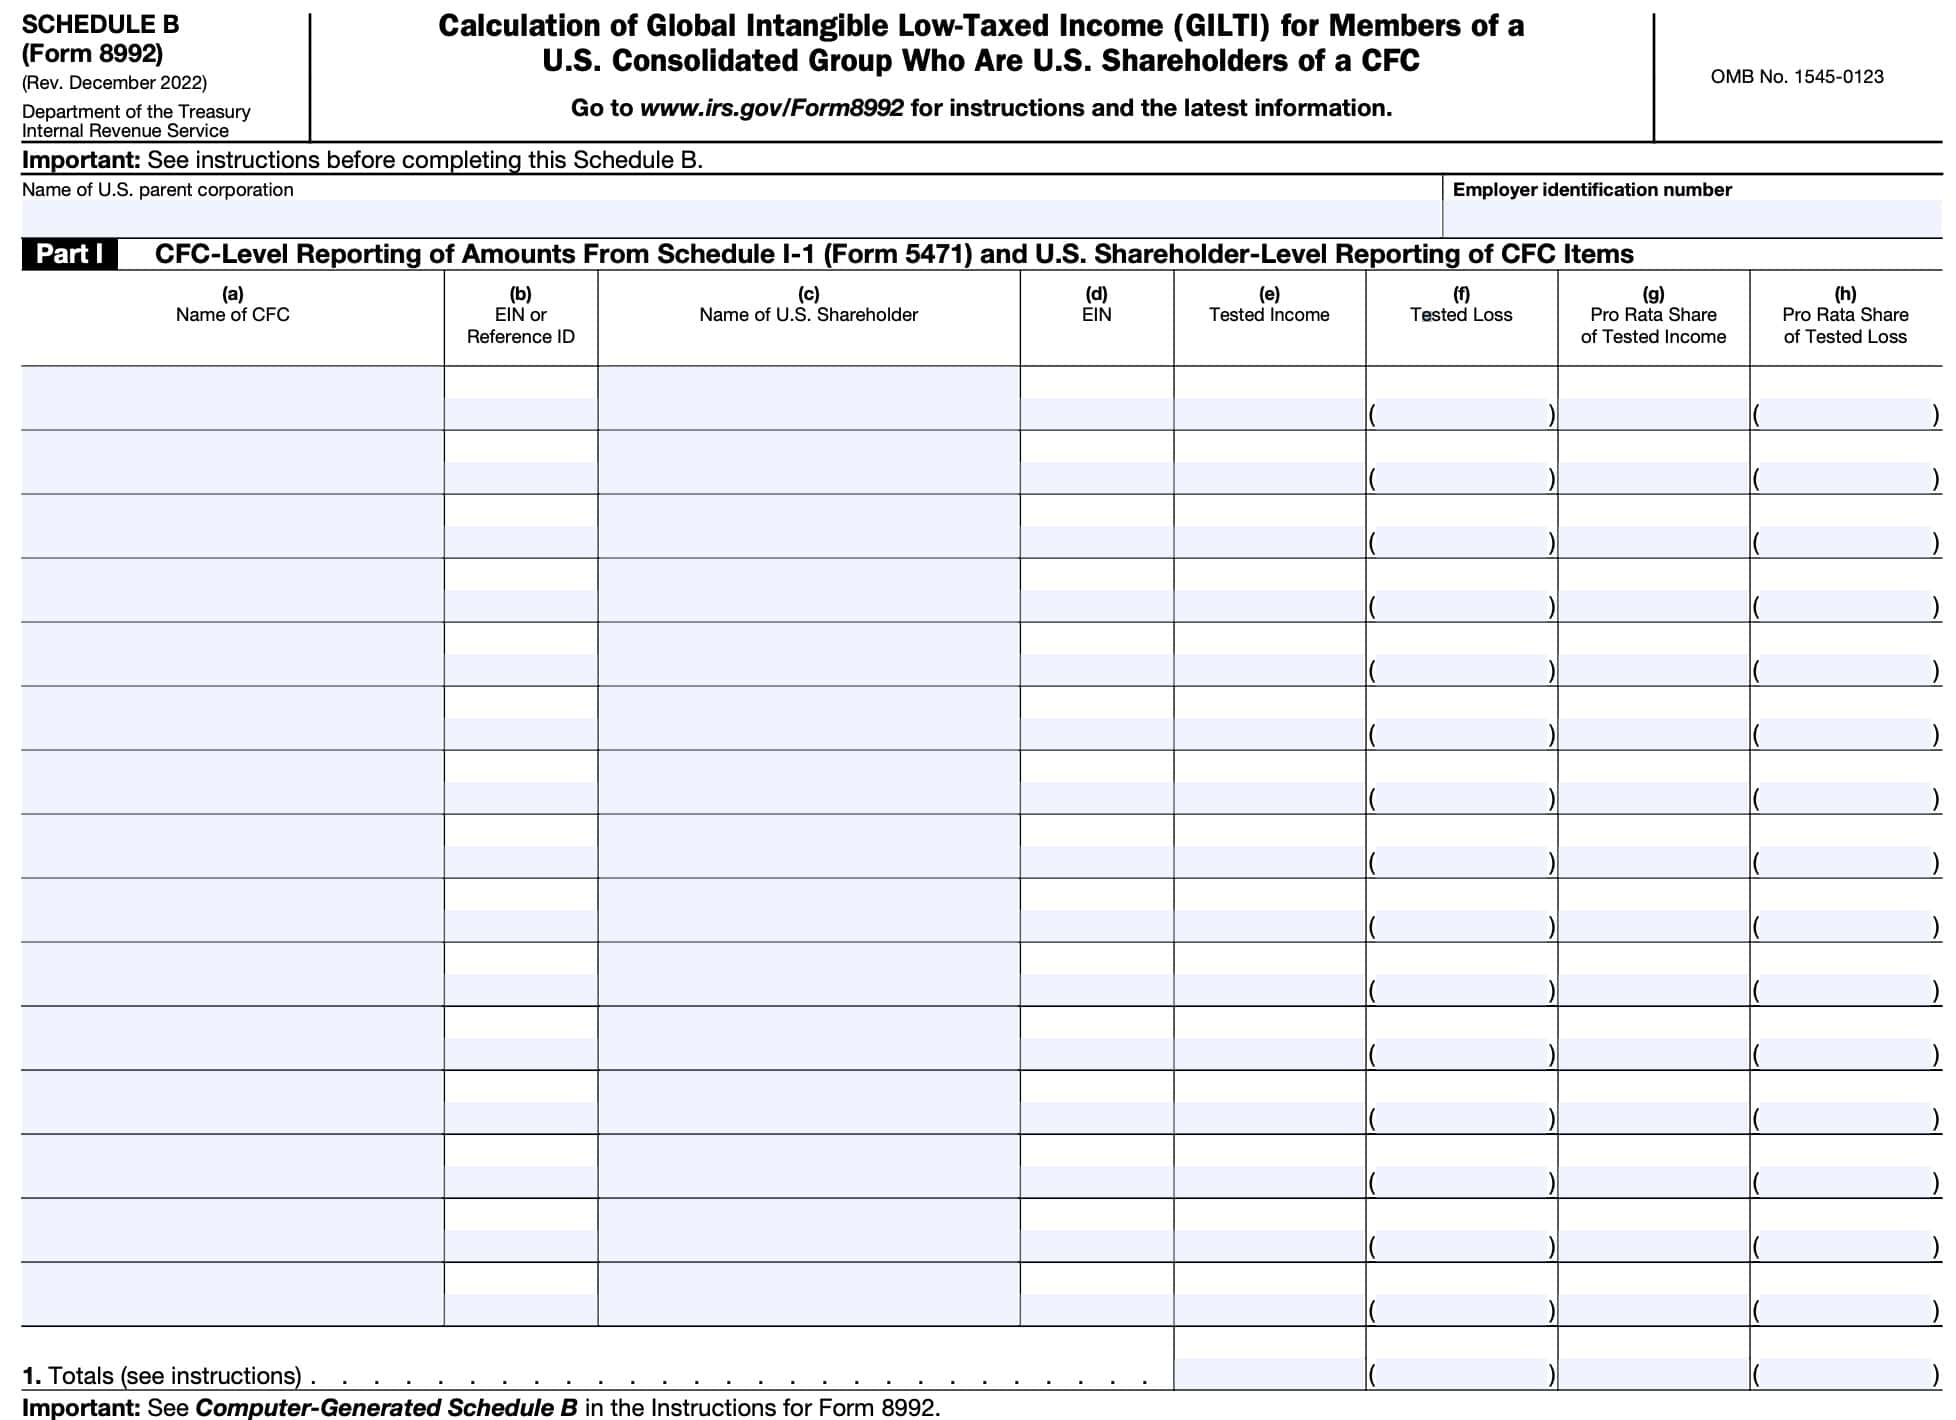 schedule b part i: cfc-level reporting of amounts from Schedule I-1 (Form 5471) and U.S. Shareholder-level reporting of CFC items, columns (a) through (h)